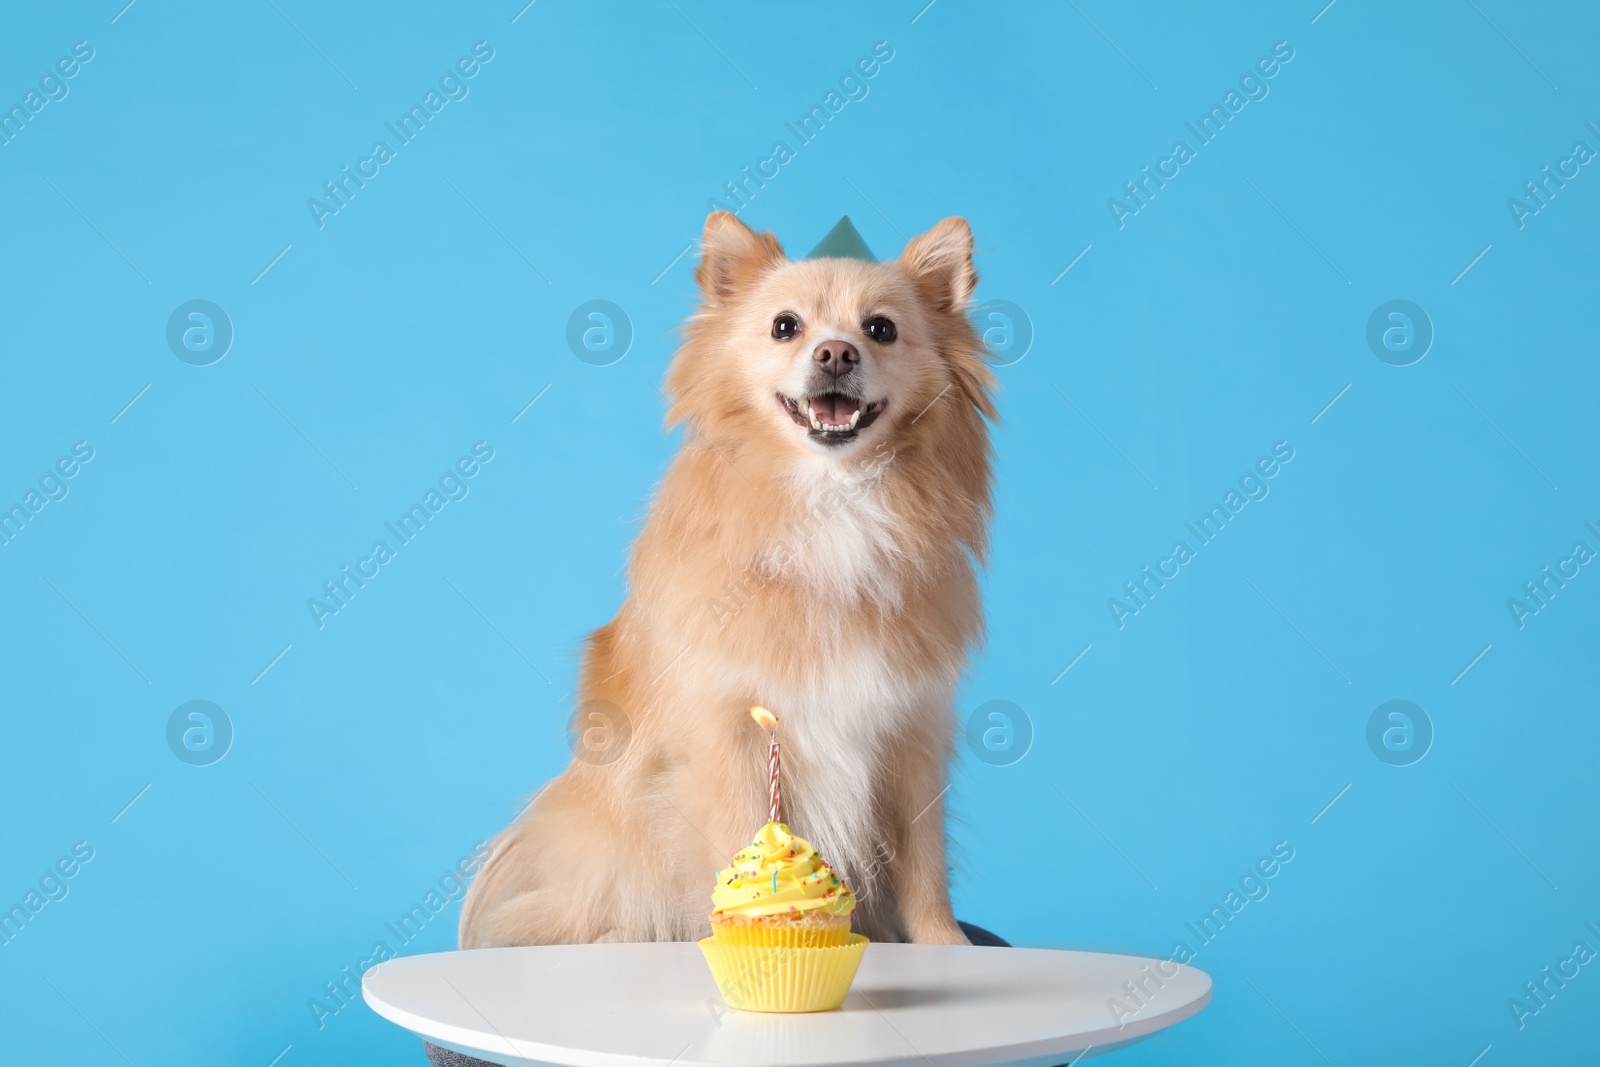 Photo of Cute dog wearing party hat at table with delicious birthday cupcake on light blue background